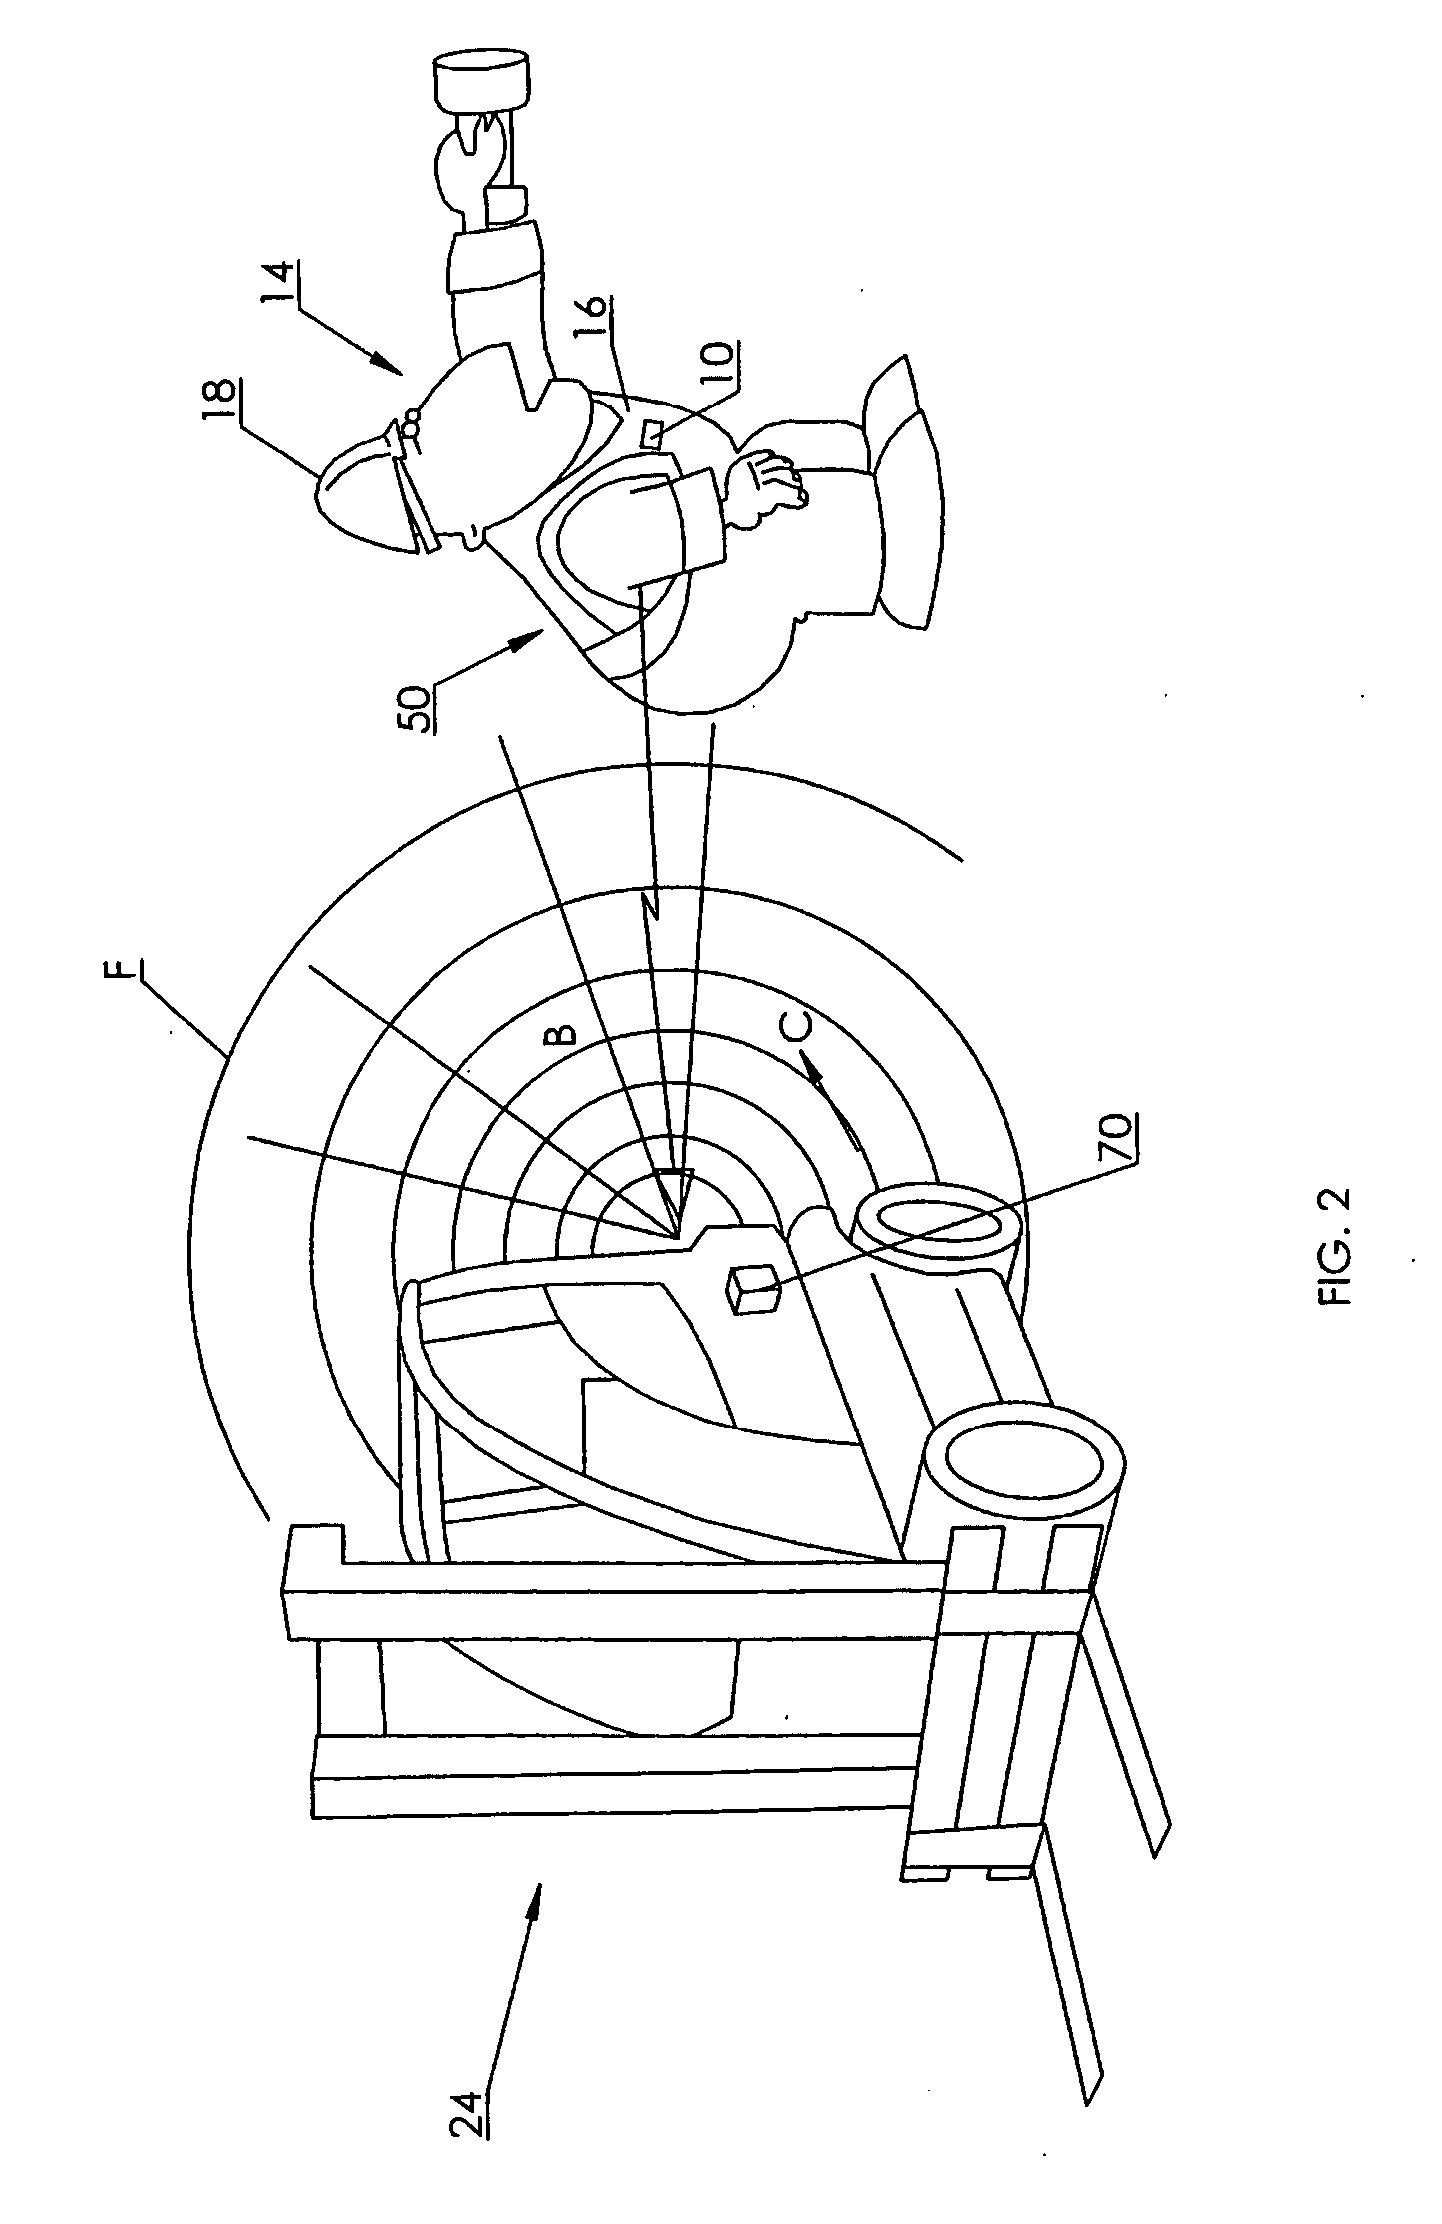 Radio frequency identification based personnel safety system